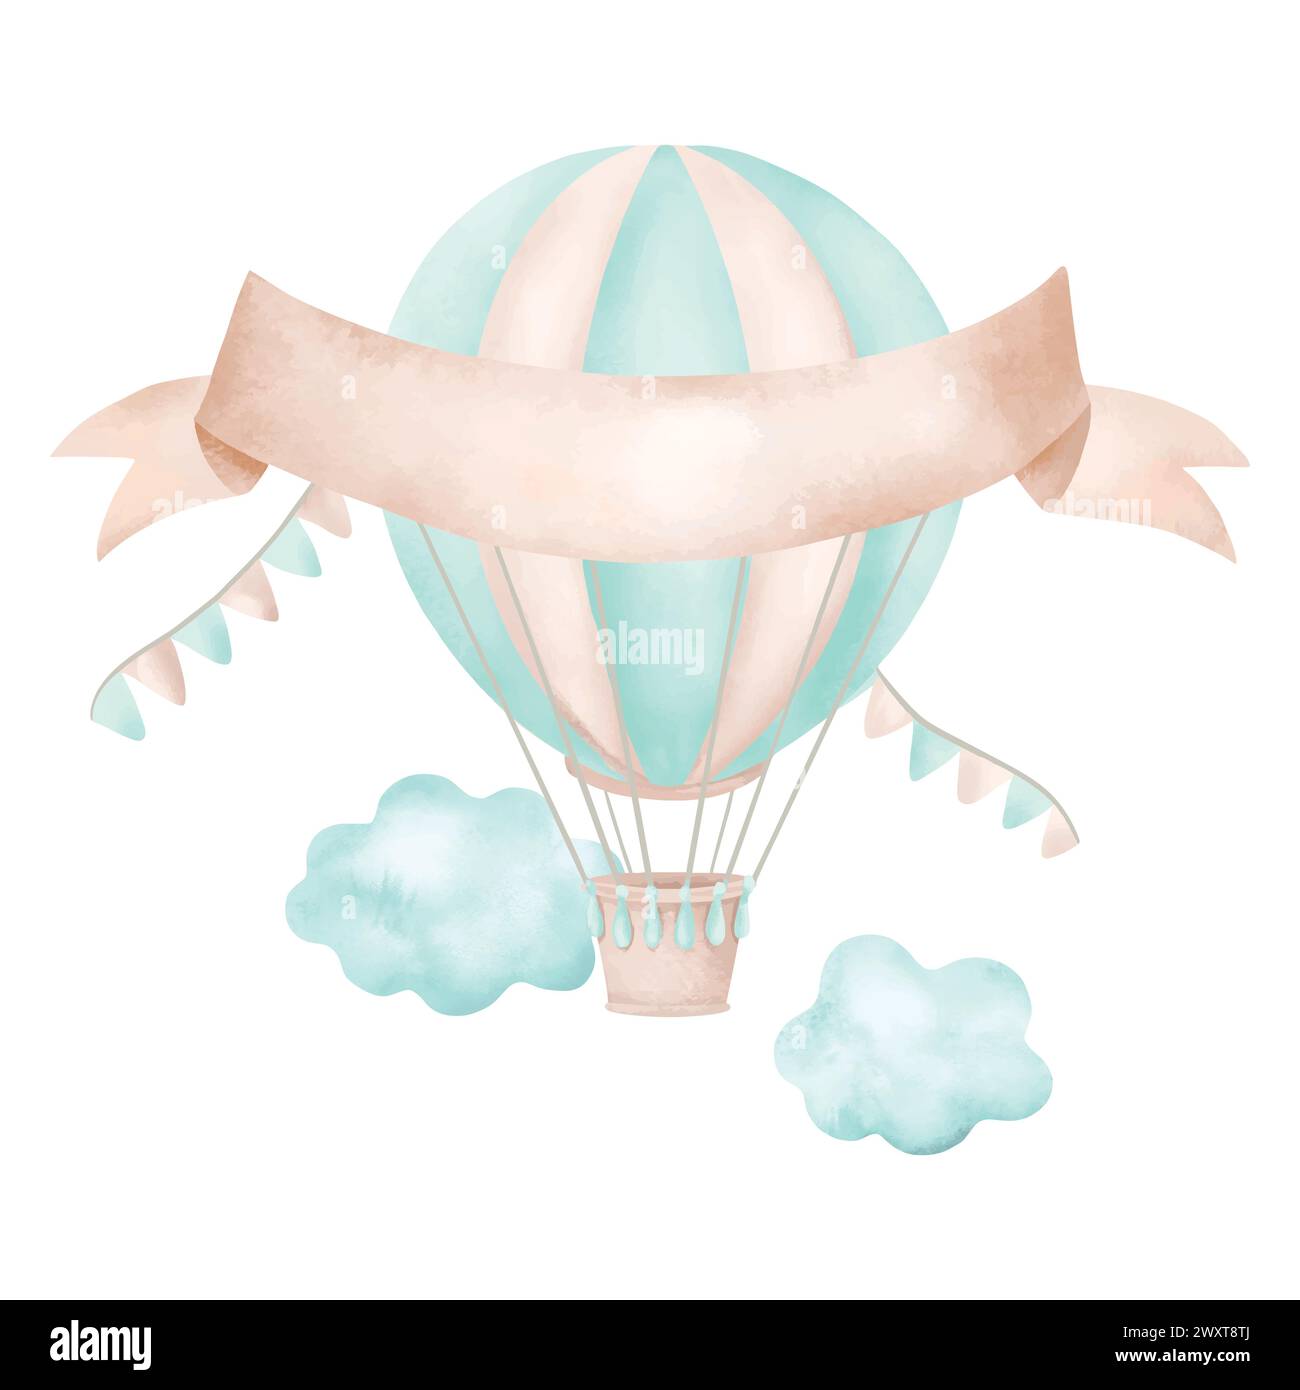 Air balloon, banner for text, clouds, watercolor. Hand drawn vector illustration in pastel colors for cards, invitations, brochures, websites, covers. Stock Vector